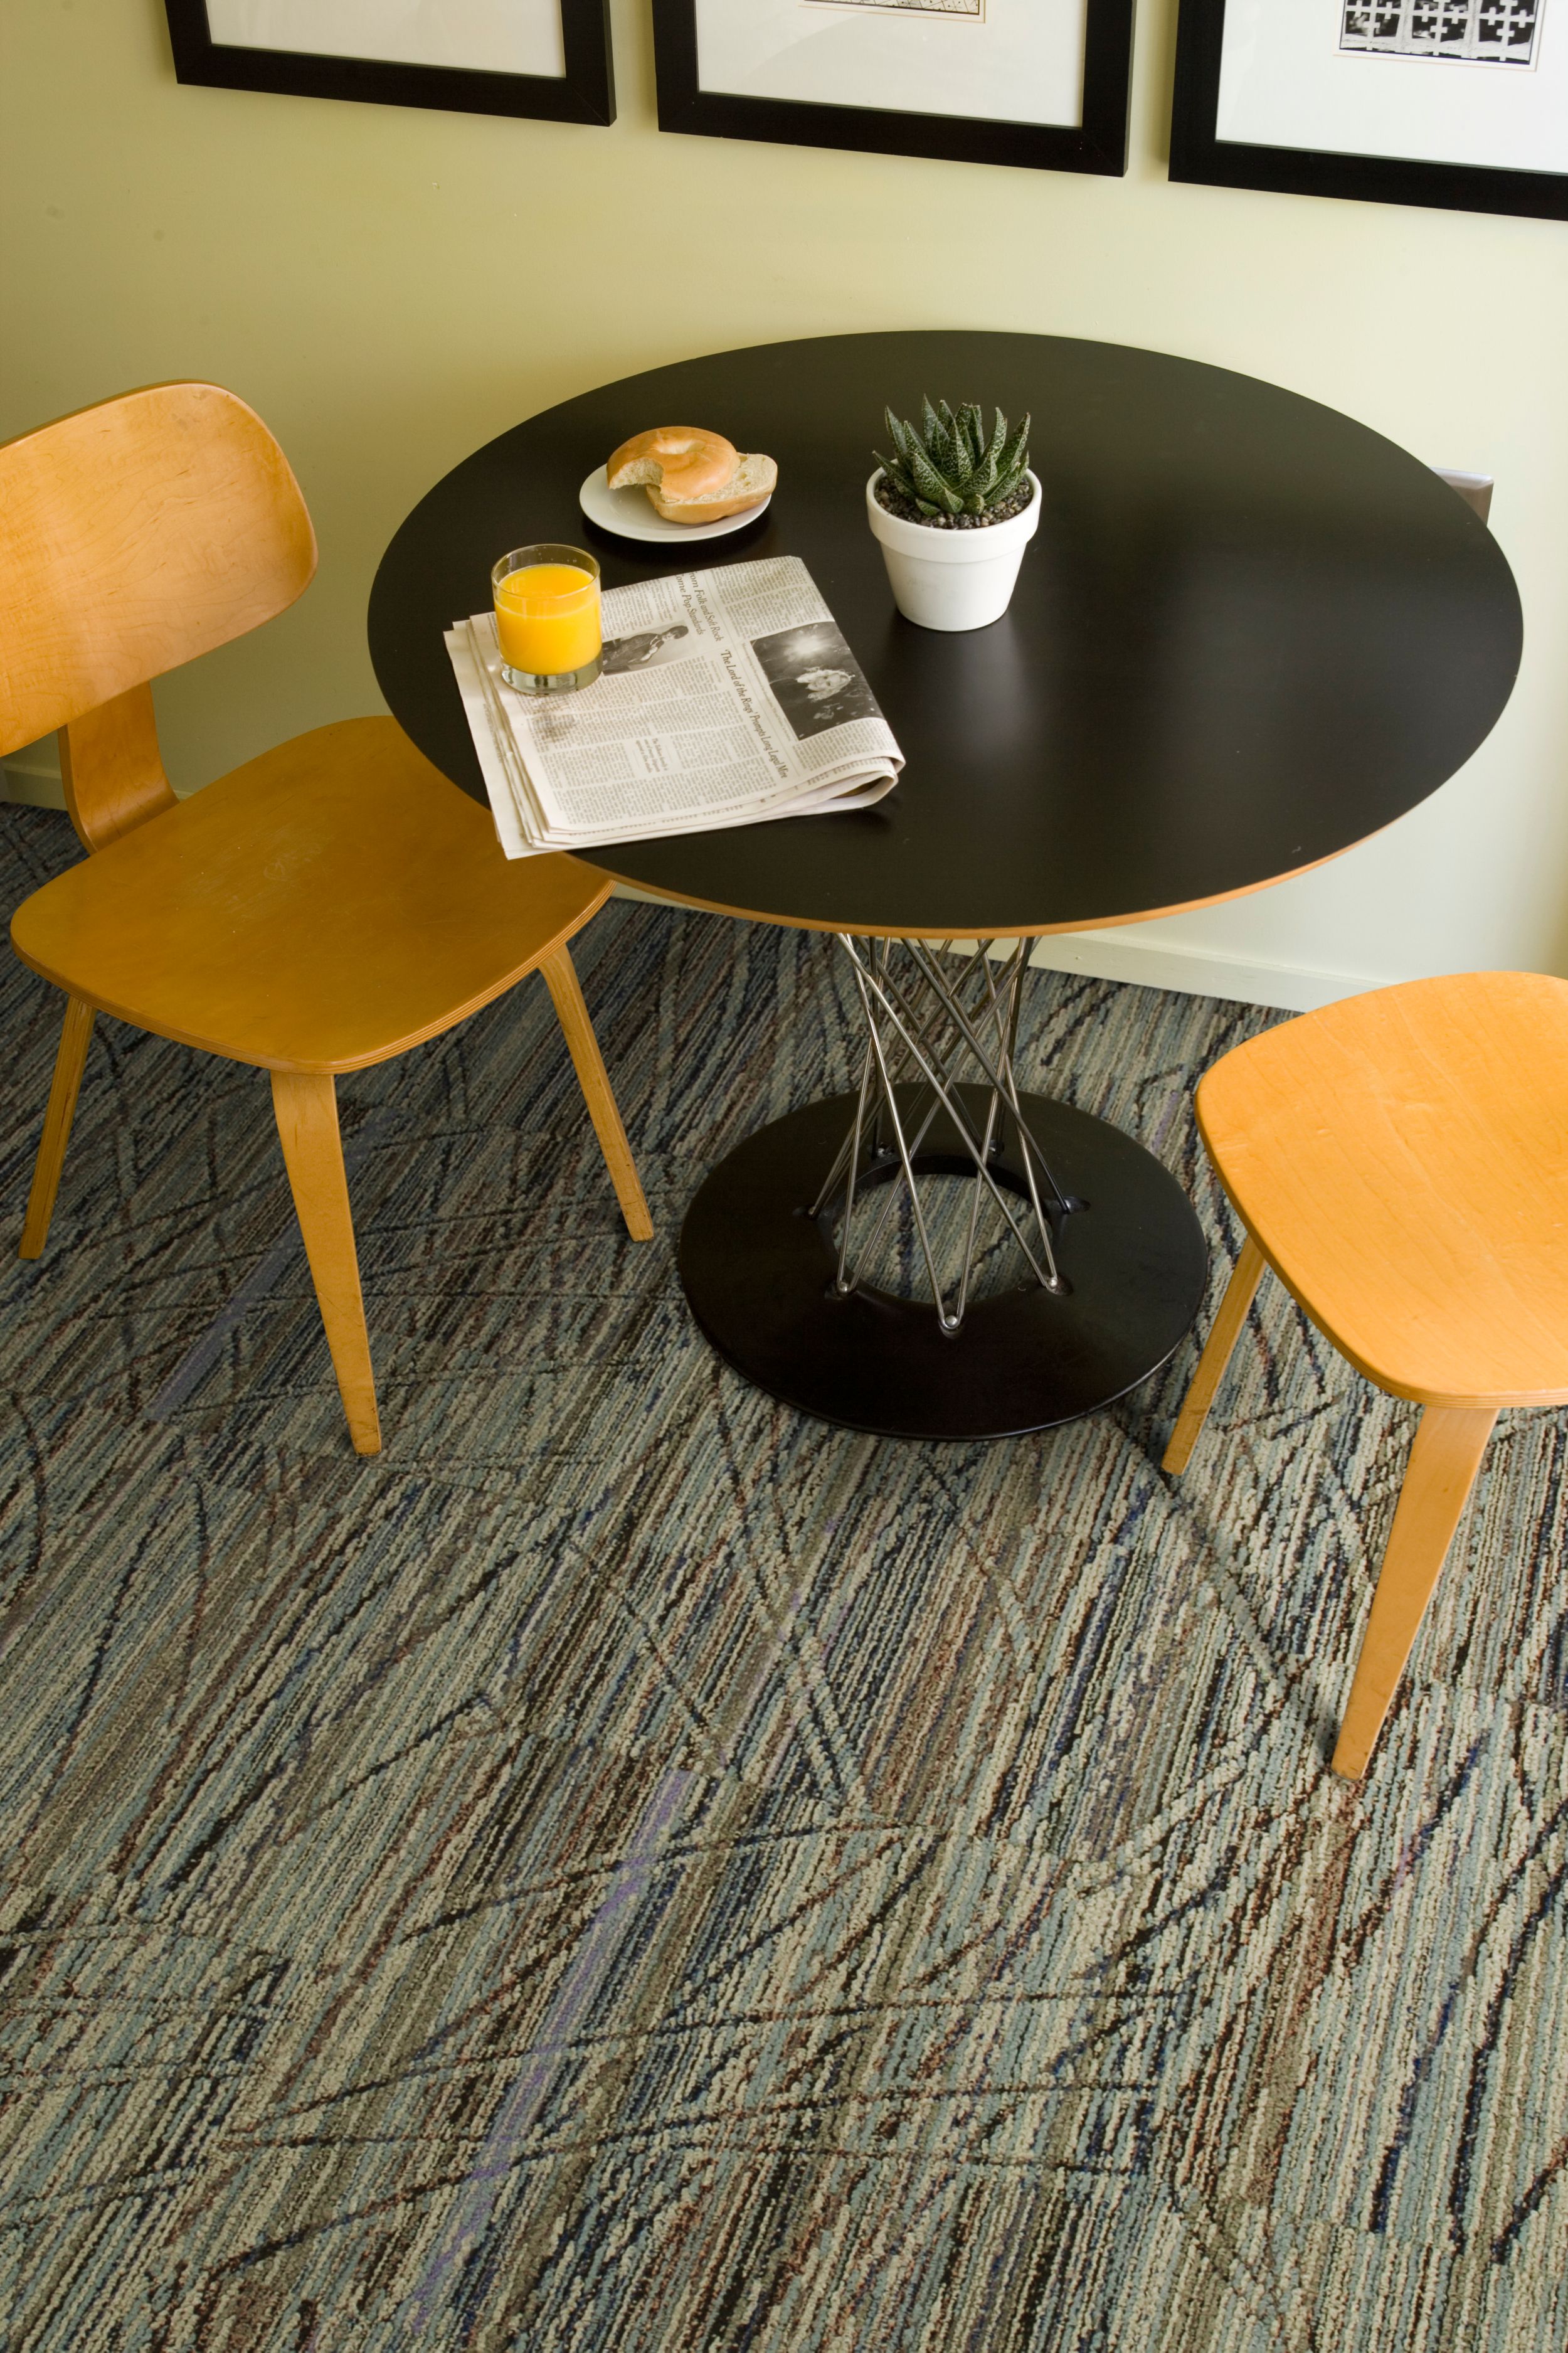 Detail of Interface Prairie Grass carpet tile in break area with table and two chairs numéro d’image 9